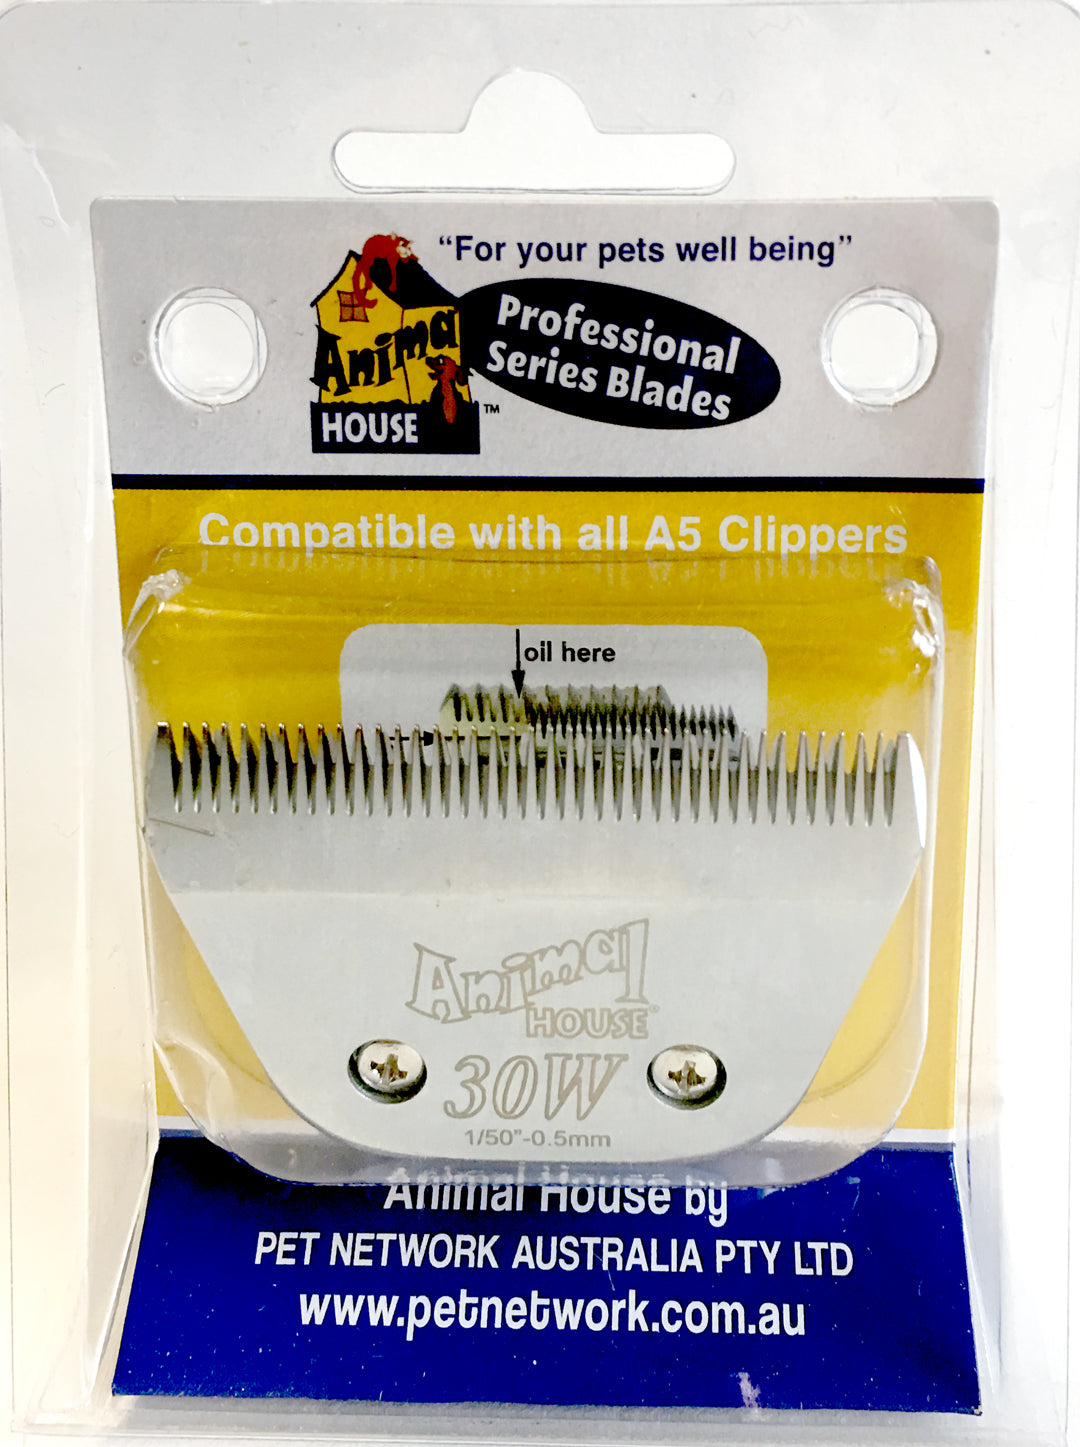 Animal House Prof. Series Stainless Steel Clipper Blades – Assorted Sizes